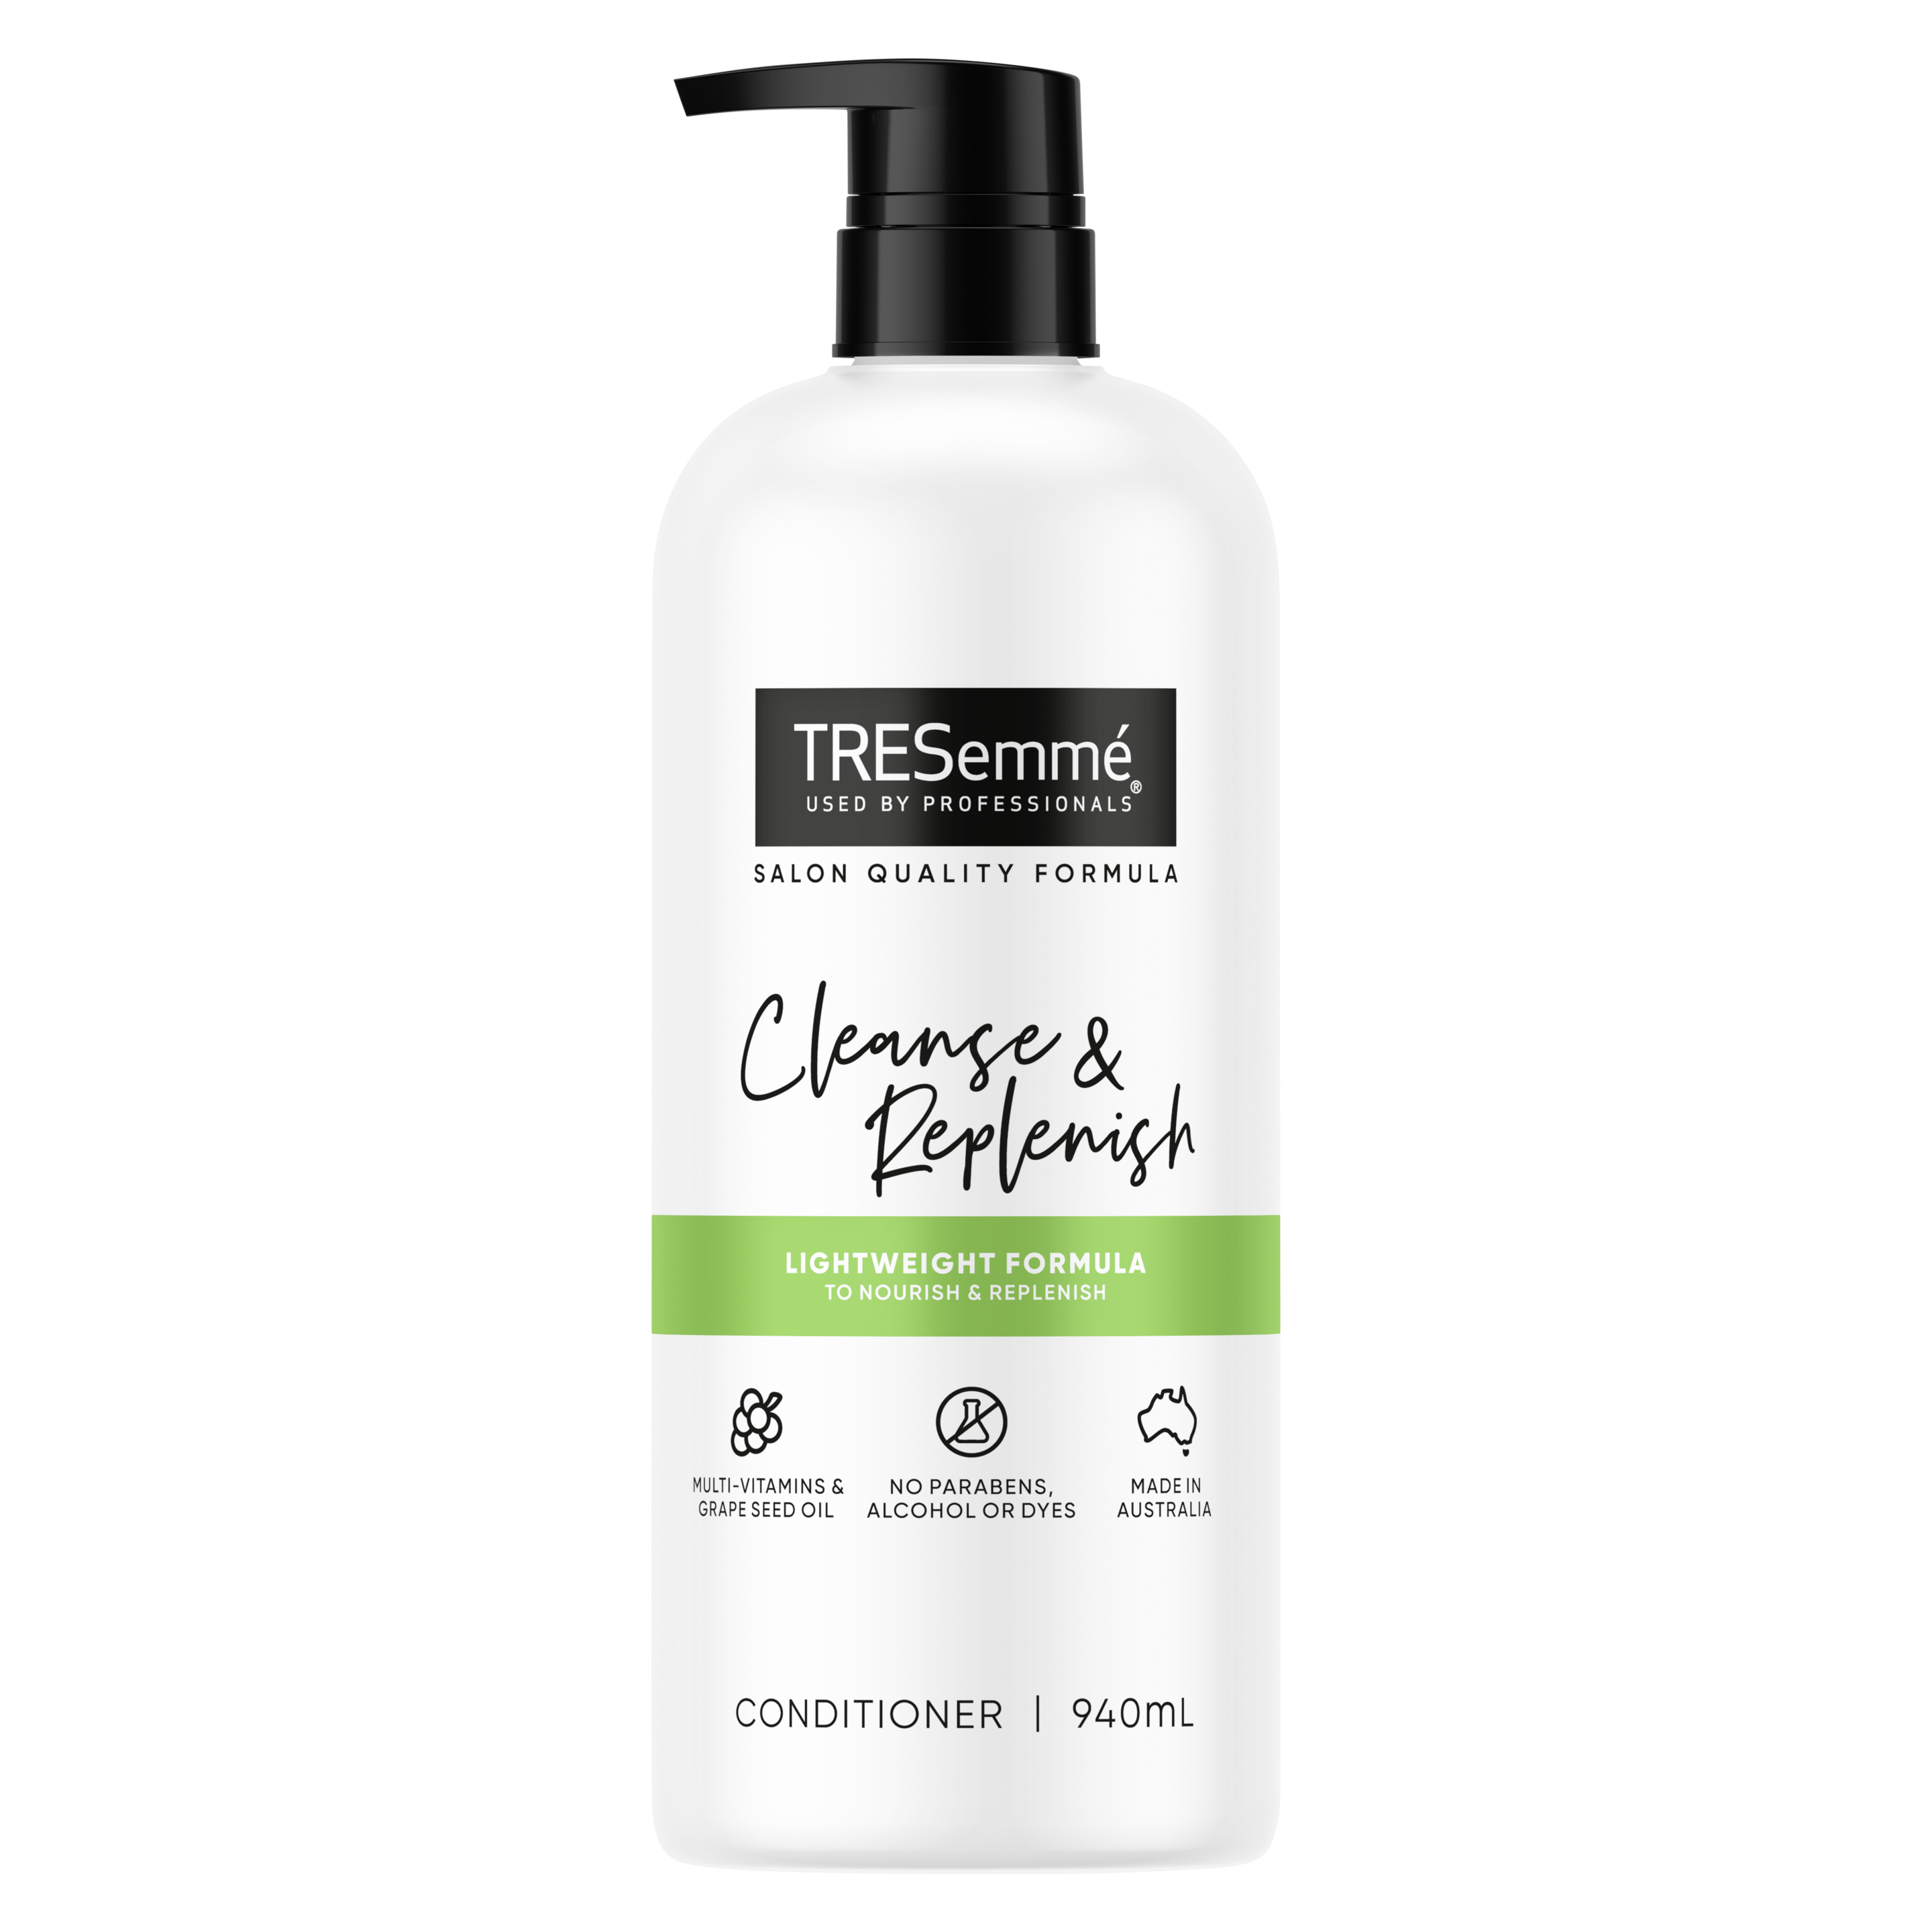 A 940ml bottle of TRESemmé Cleanse & Replenish Conditioner